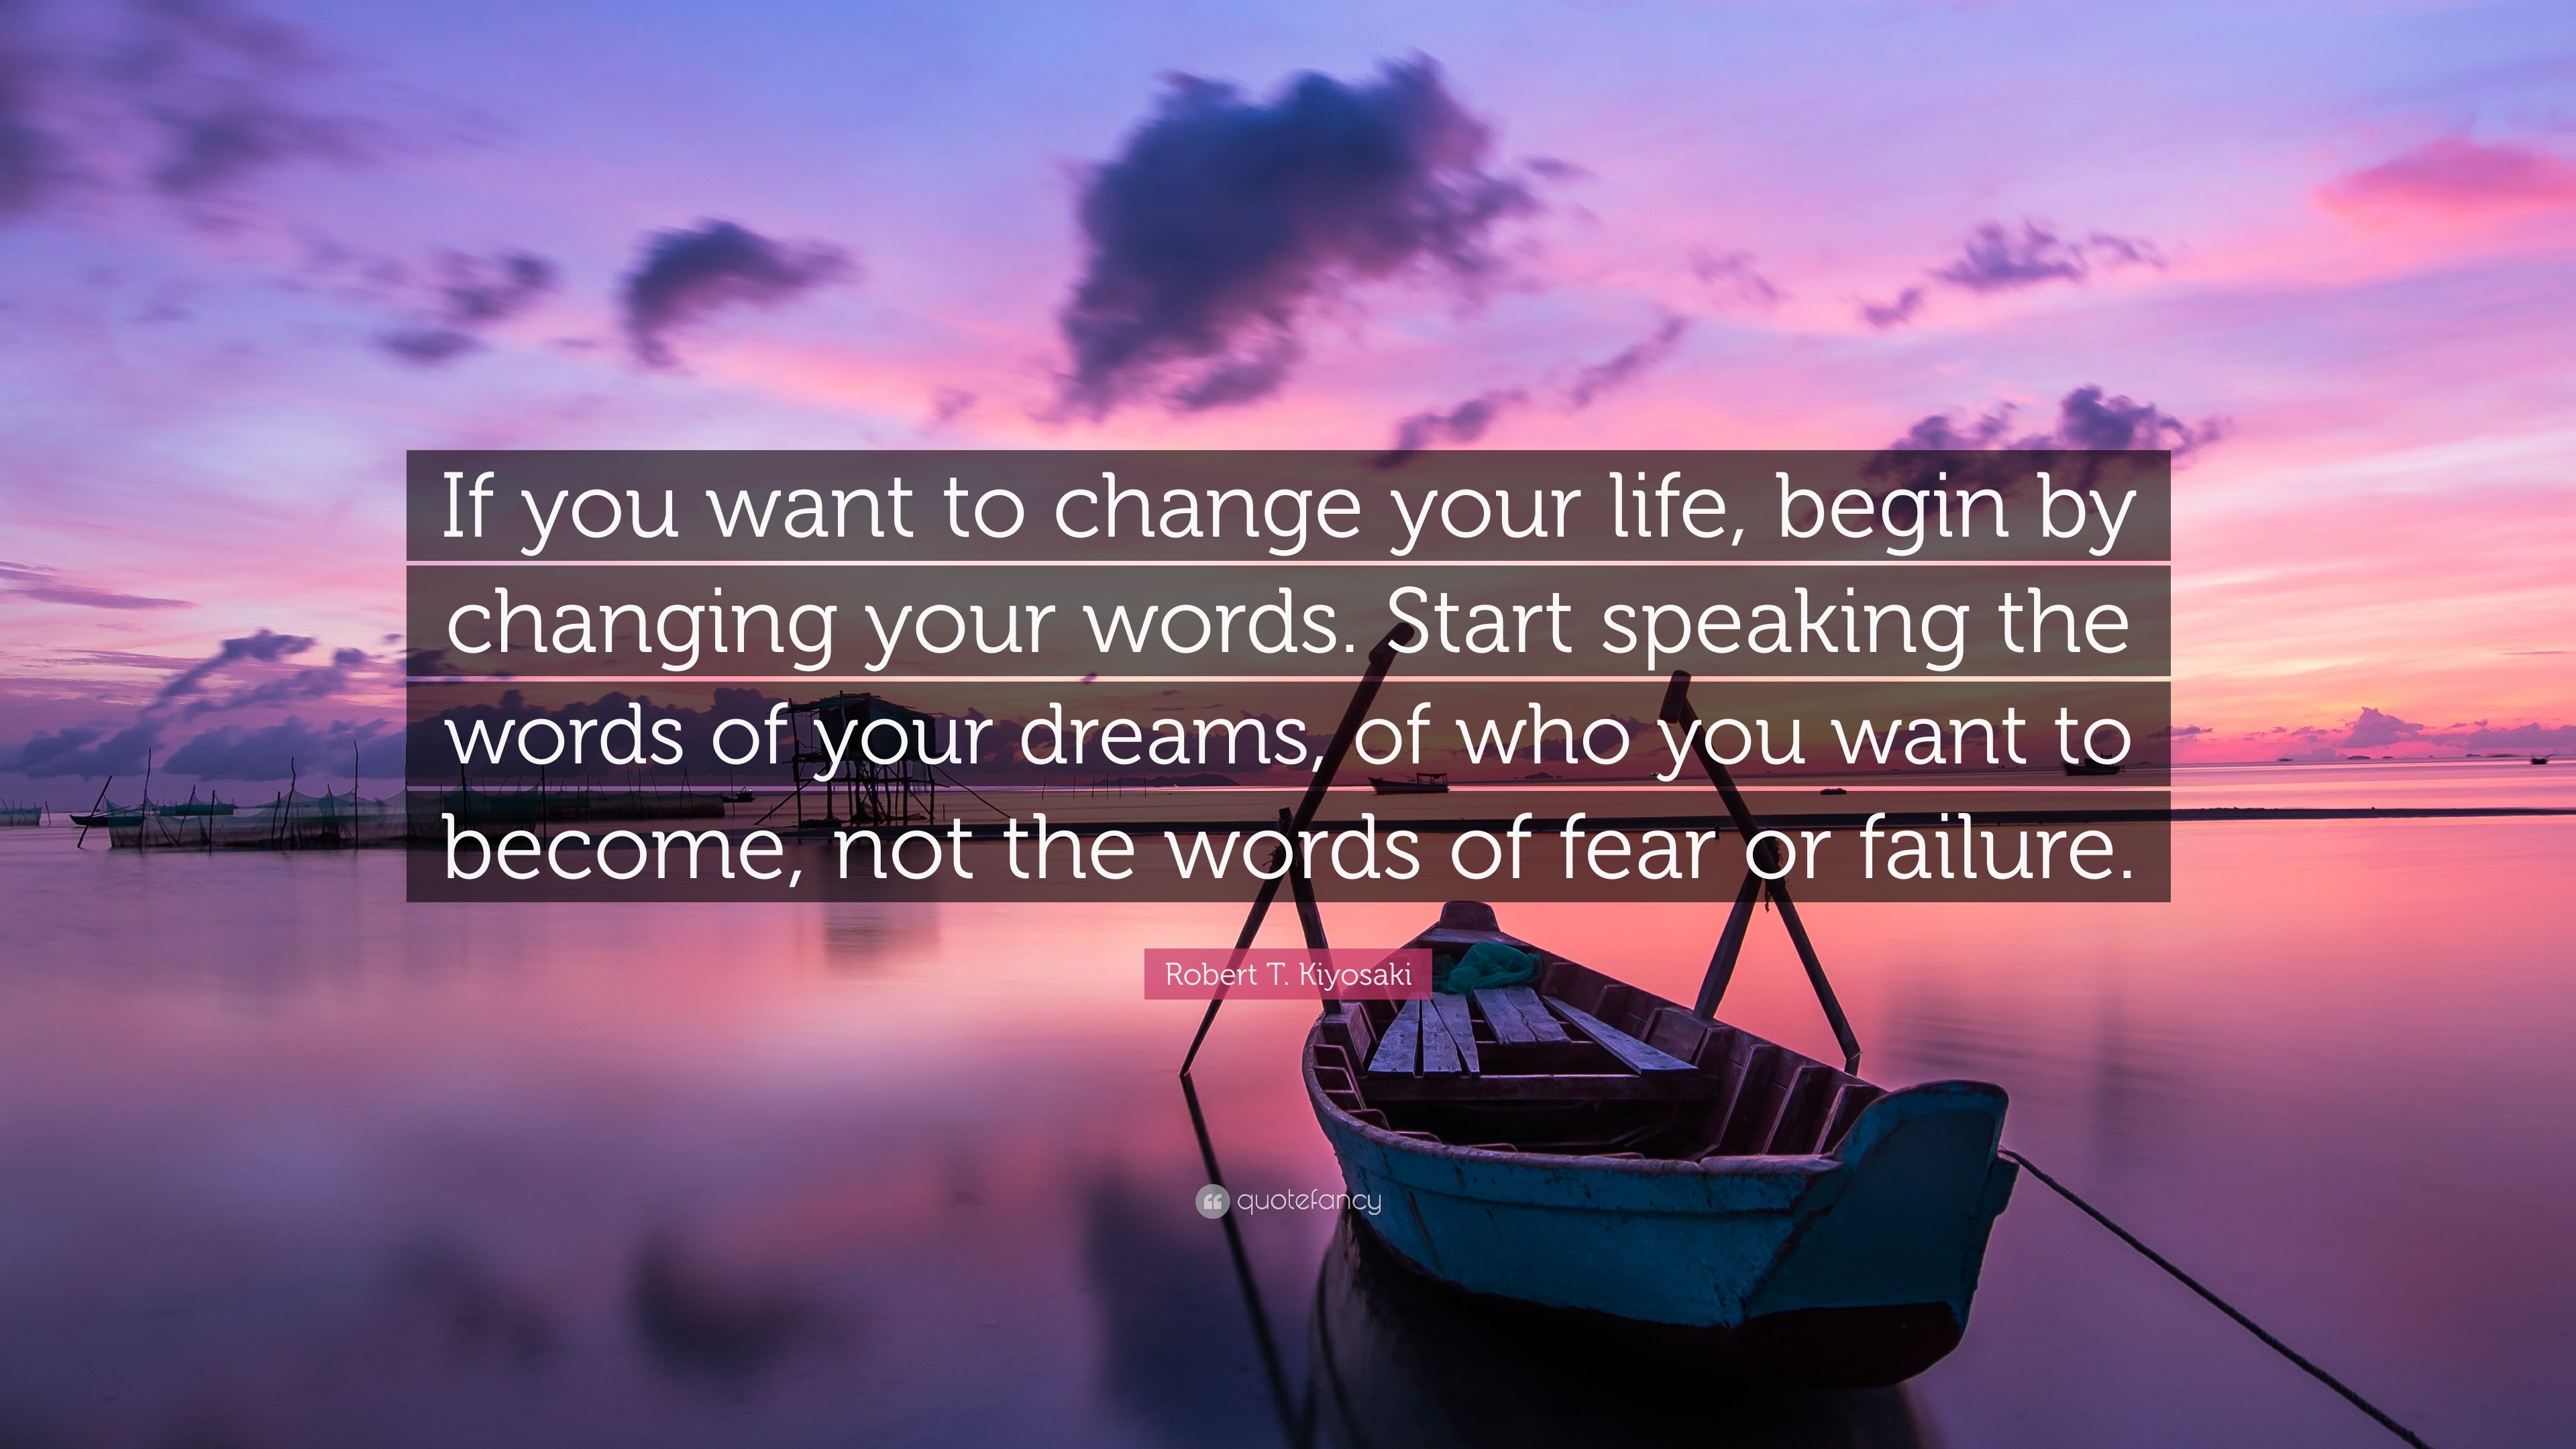 Robert T. Kiyosaki Quote: “If you want to change your life, begin by